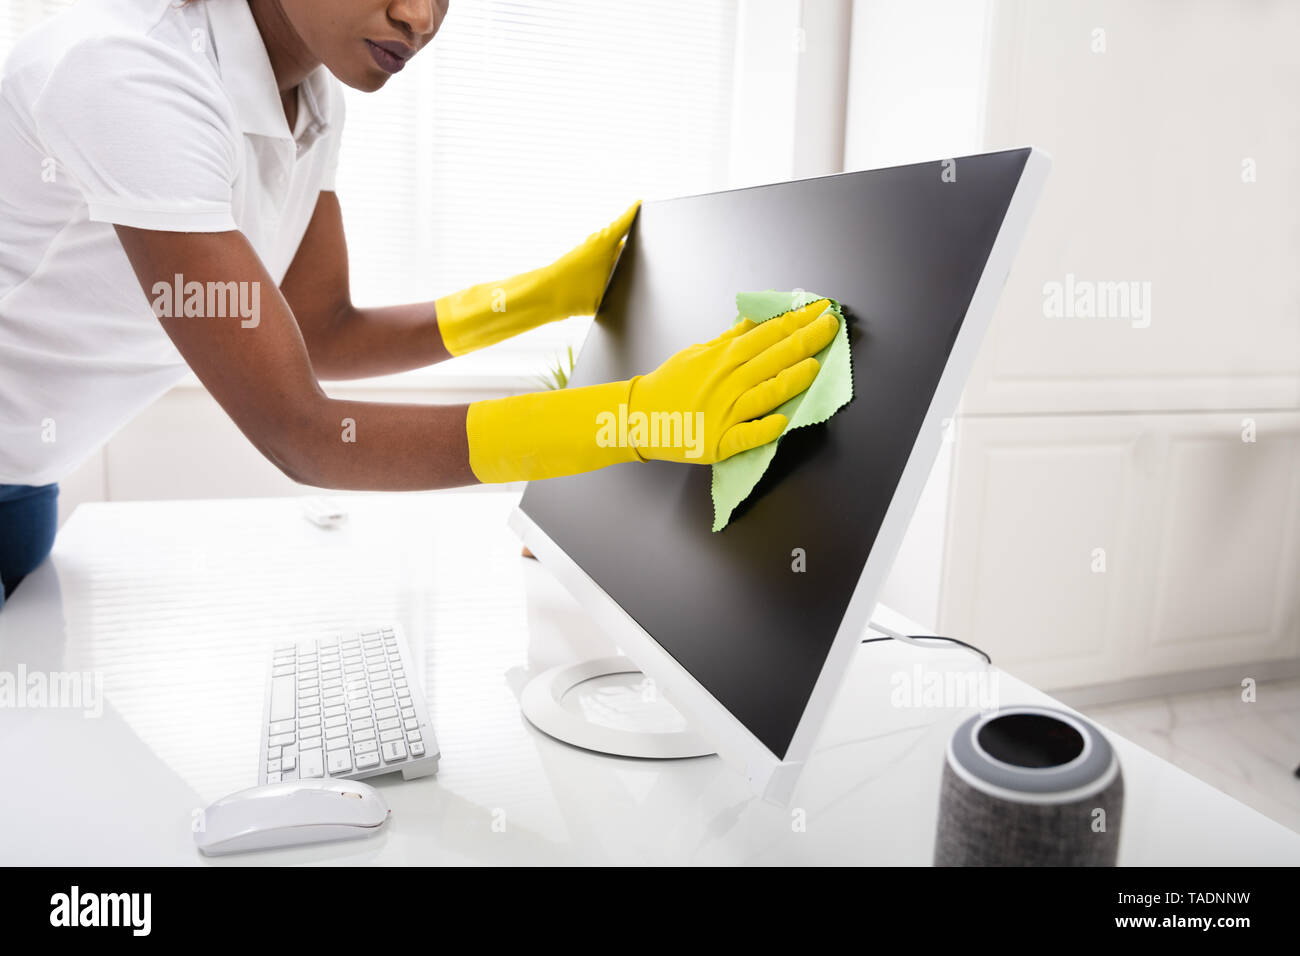 Close-up Of A Woman's Hand Cleaning Desktop Screen With Green Rag In Office Stock Photo